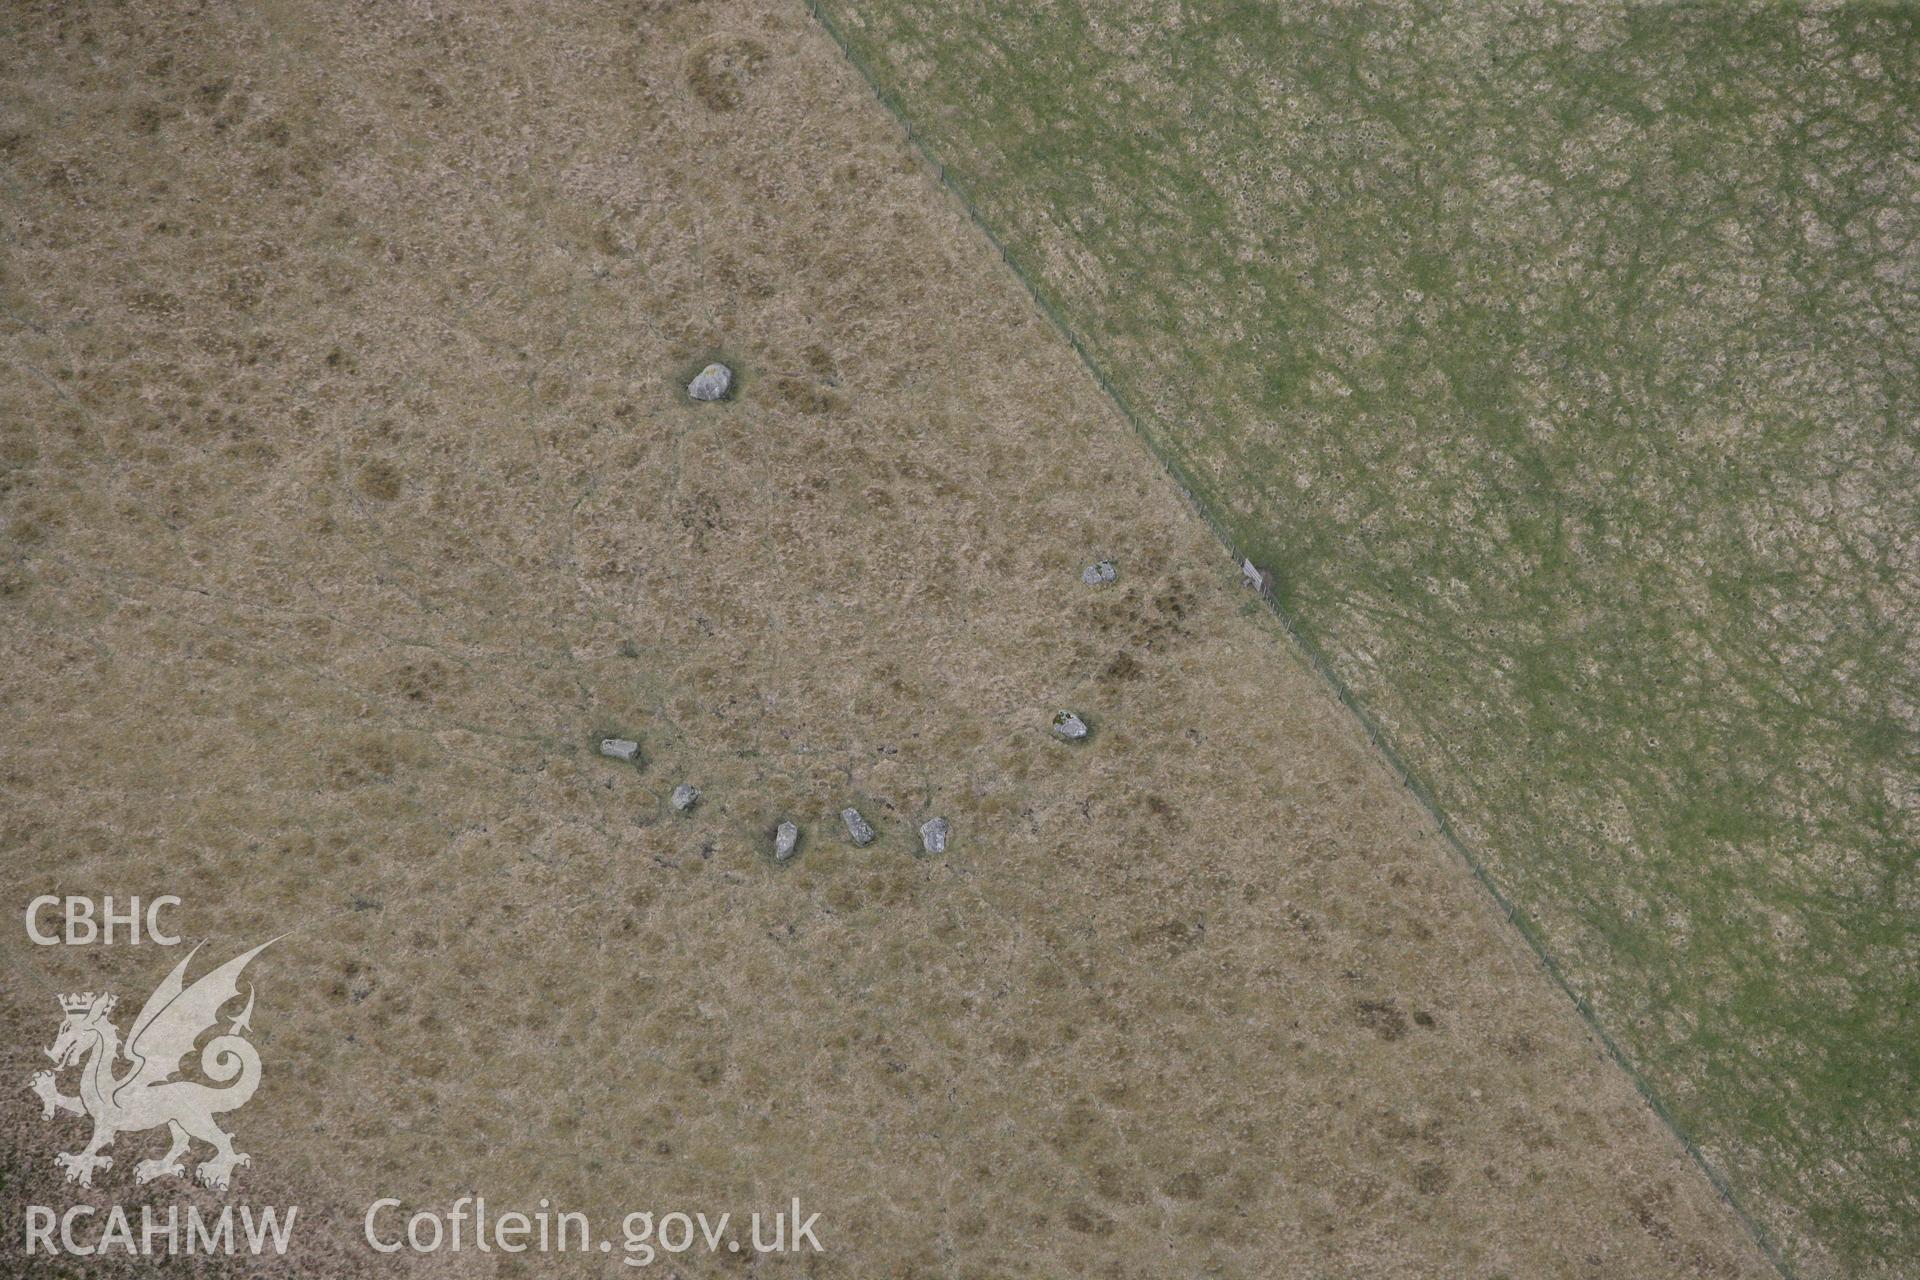 RCAHMW colour oblique photograph of Cerrig Gaerau stone circle. Taken by Toby Driver on 22/03/2011.